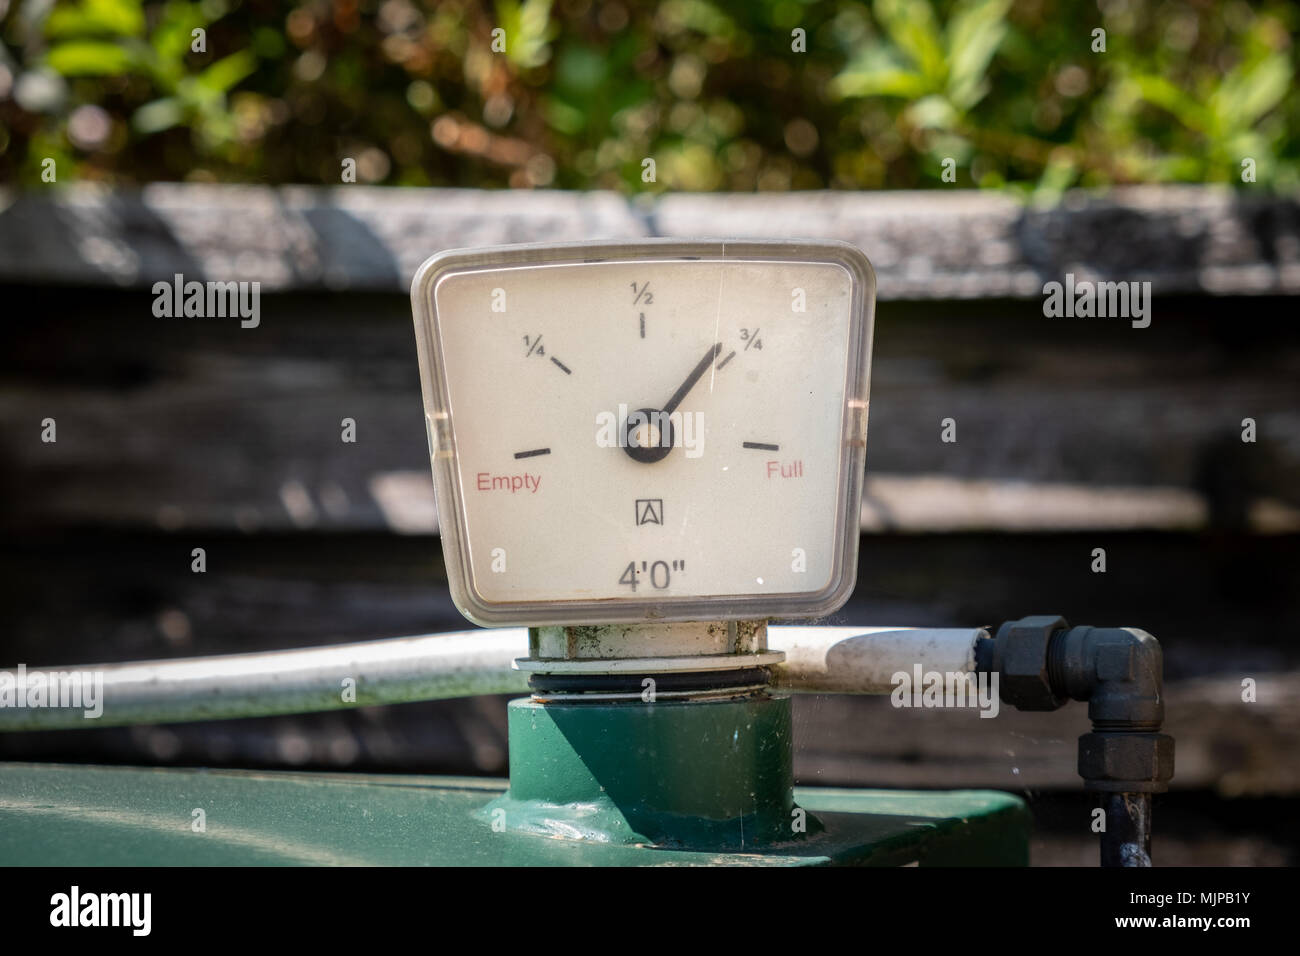 Domestic heating oil tank gauge shwoing almost three quarters full. Stock Photo